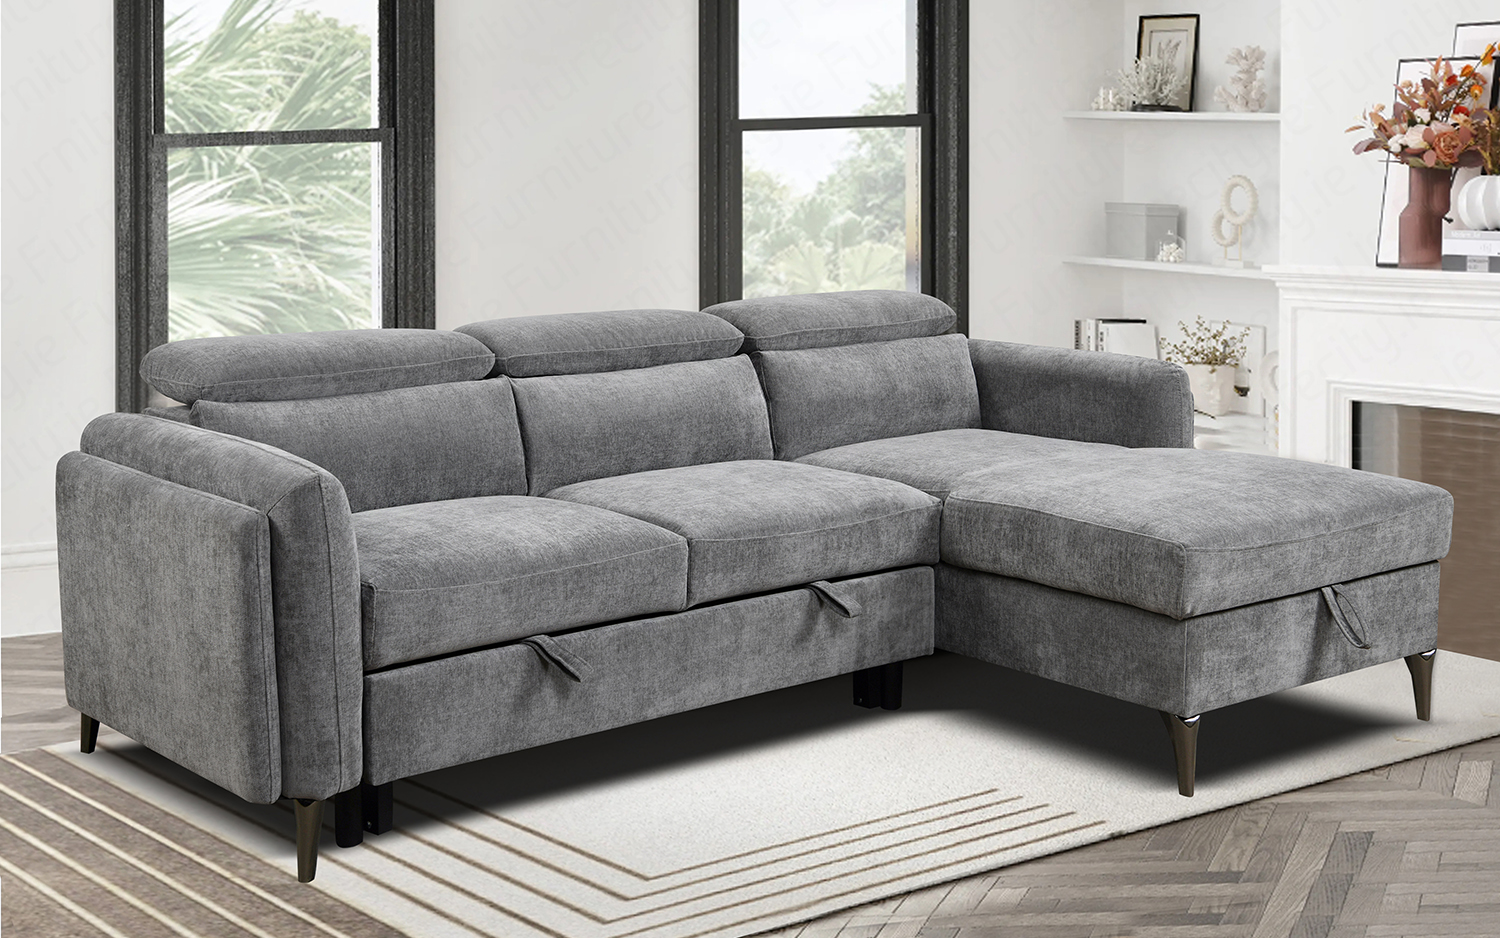 Sofa bed JERRY by Furniturecity.ie